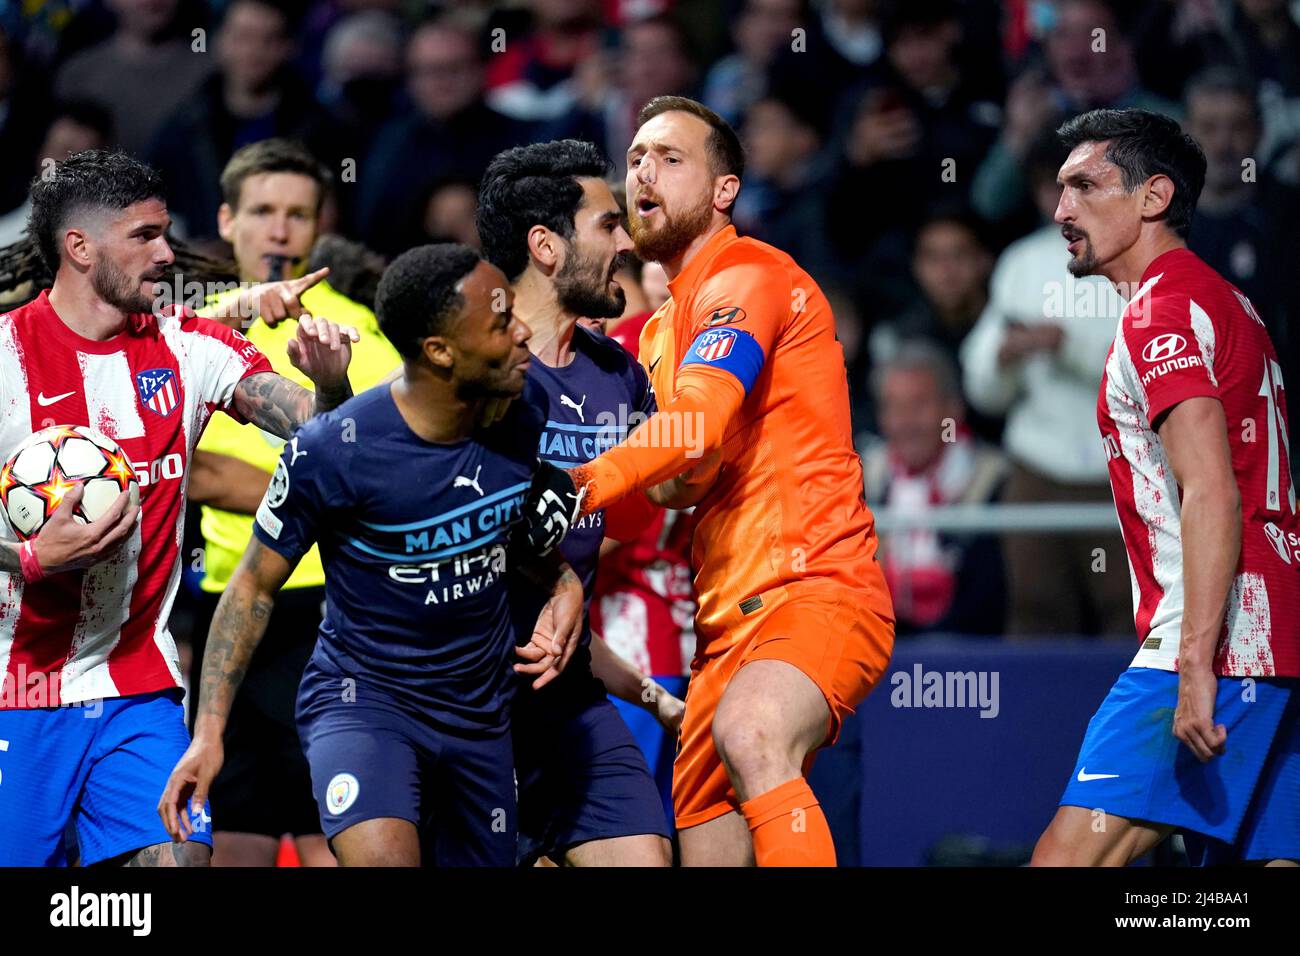 Atletico Madrid goalkeeper Jan Oblak (centre) steps in between Stefan Savic and Manchester City's Raheem Sterling and Ilkay Gundogan as tempers flare during the UEFA Champions League quarter final, second leg match at the Wanda Metropolitano Stadium, Madrid. Picture date: Wednesday April 13, 2022. Stock Photo